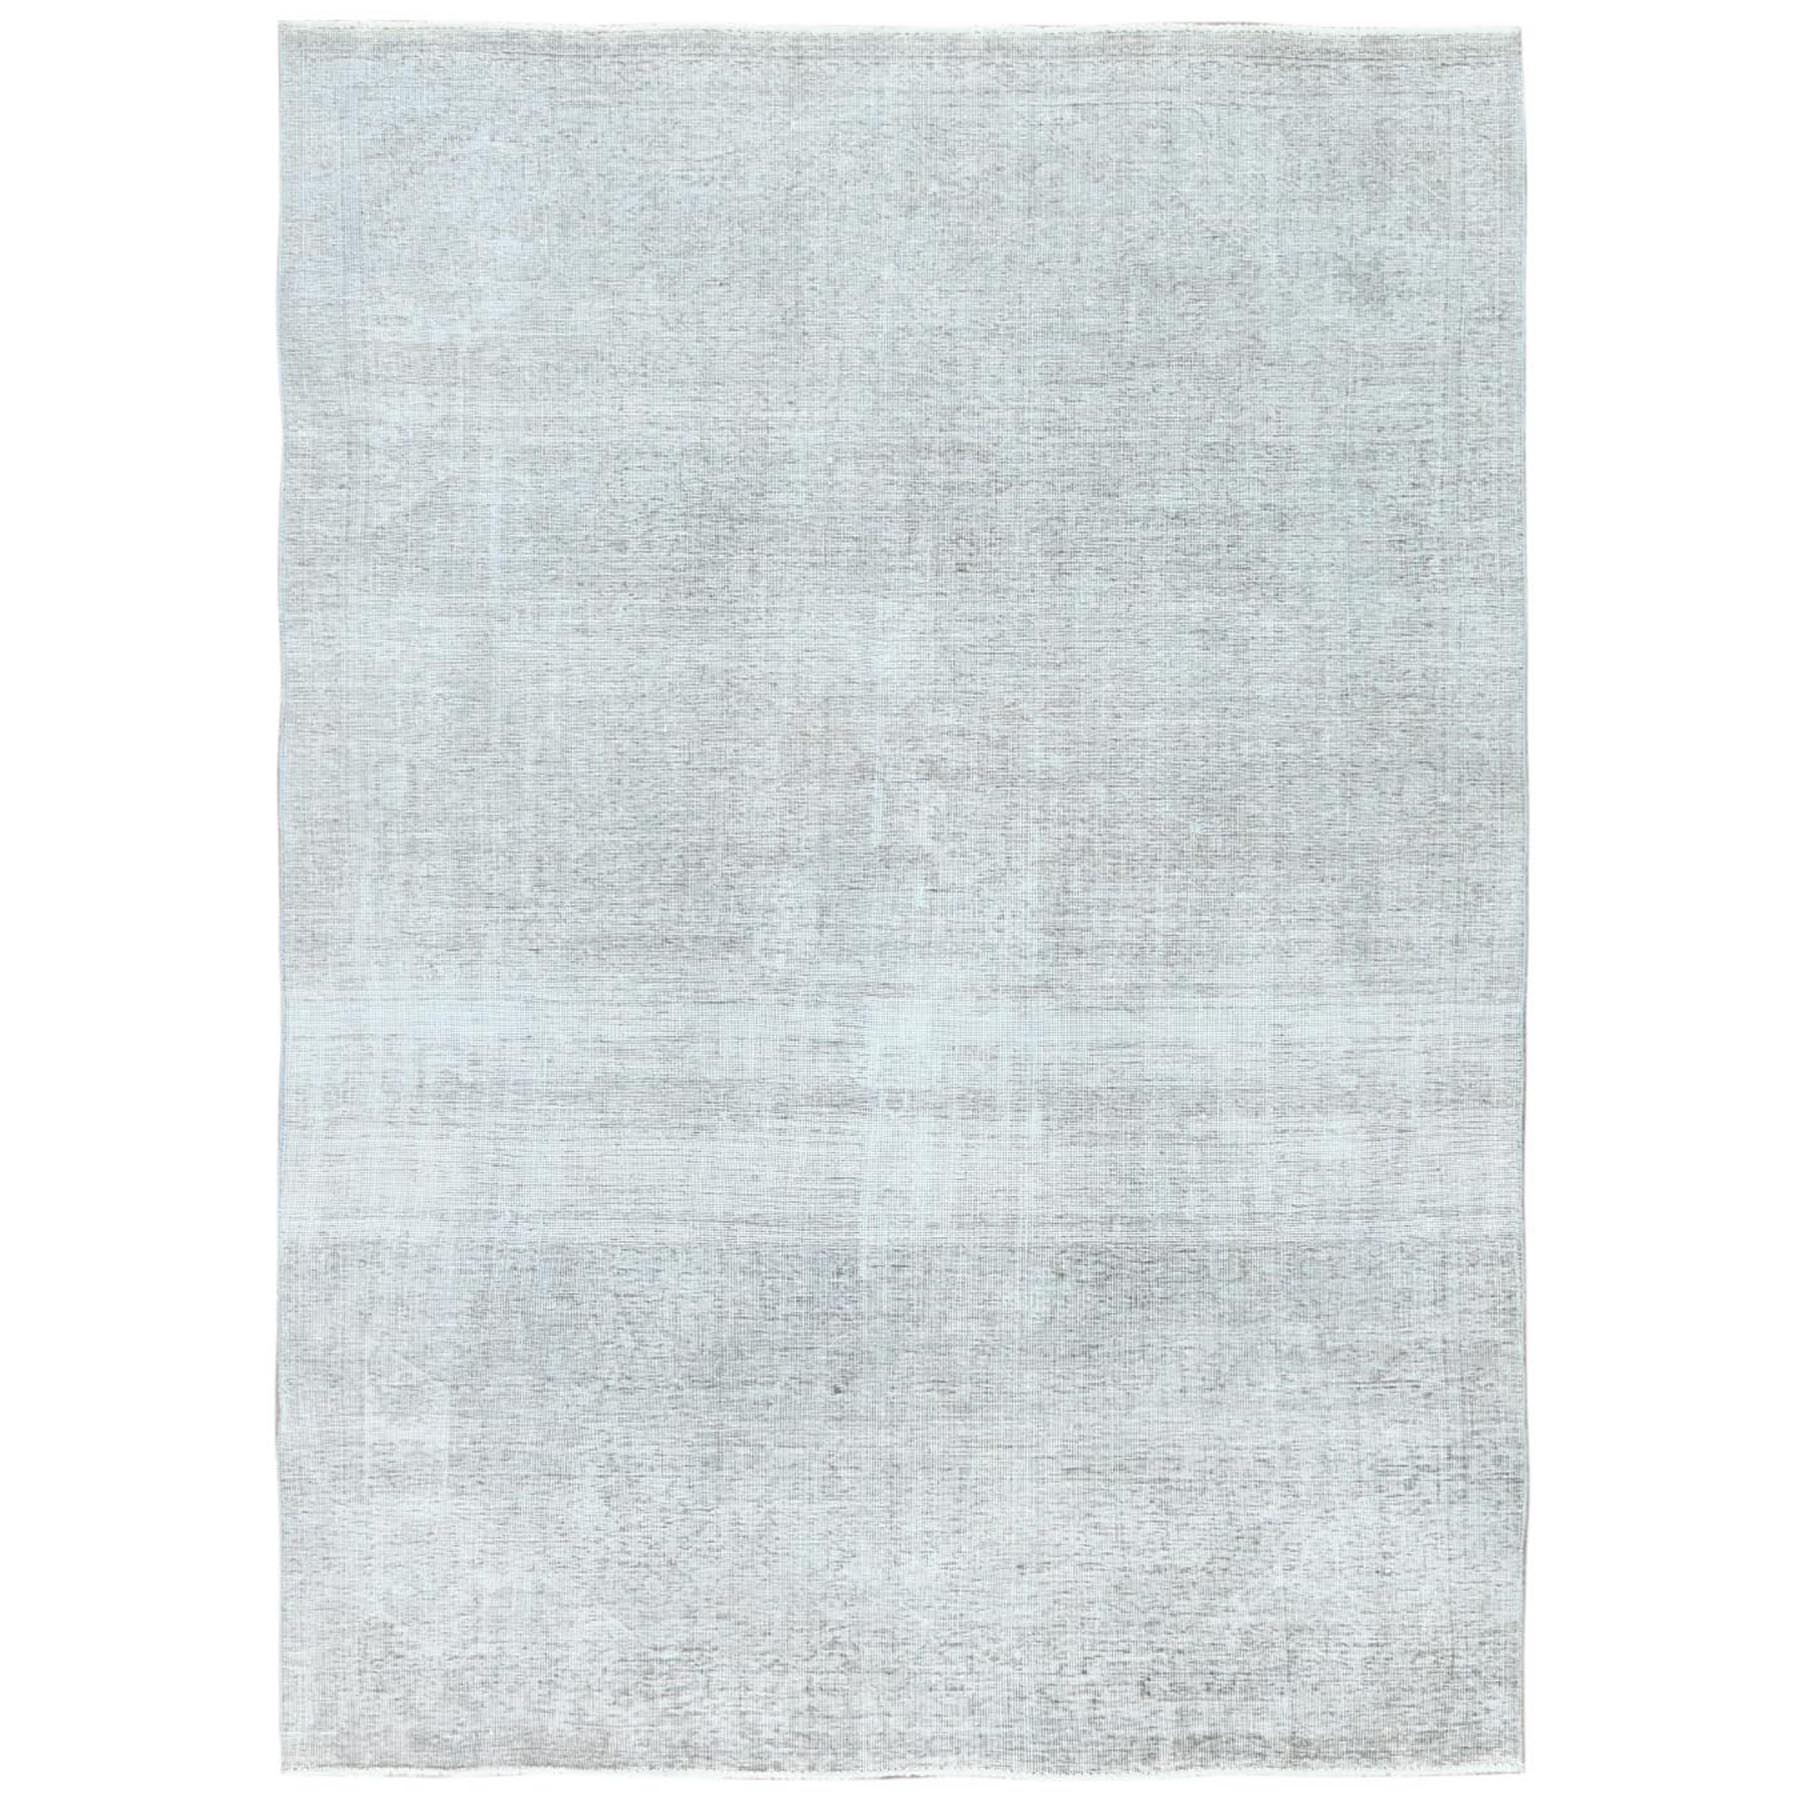  Wool Hand-Knotted Area Rug 7'0